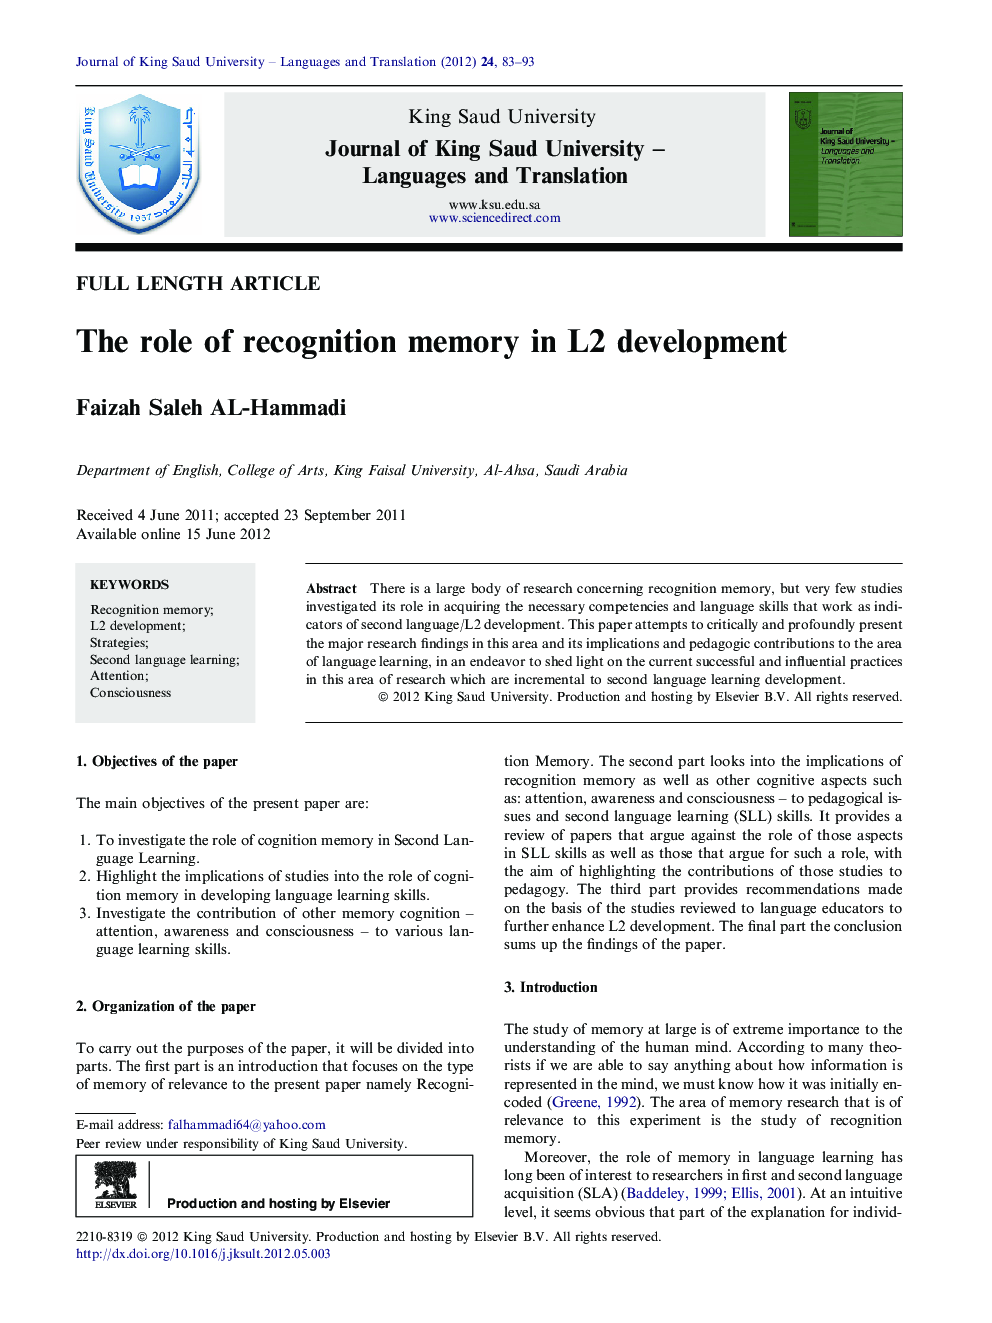 The role of recognition memory in L2 development 